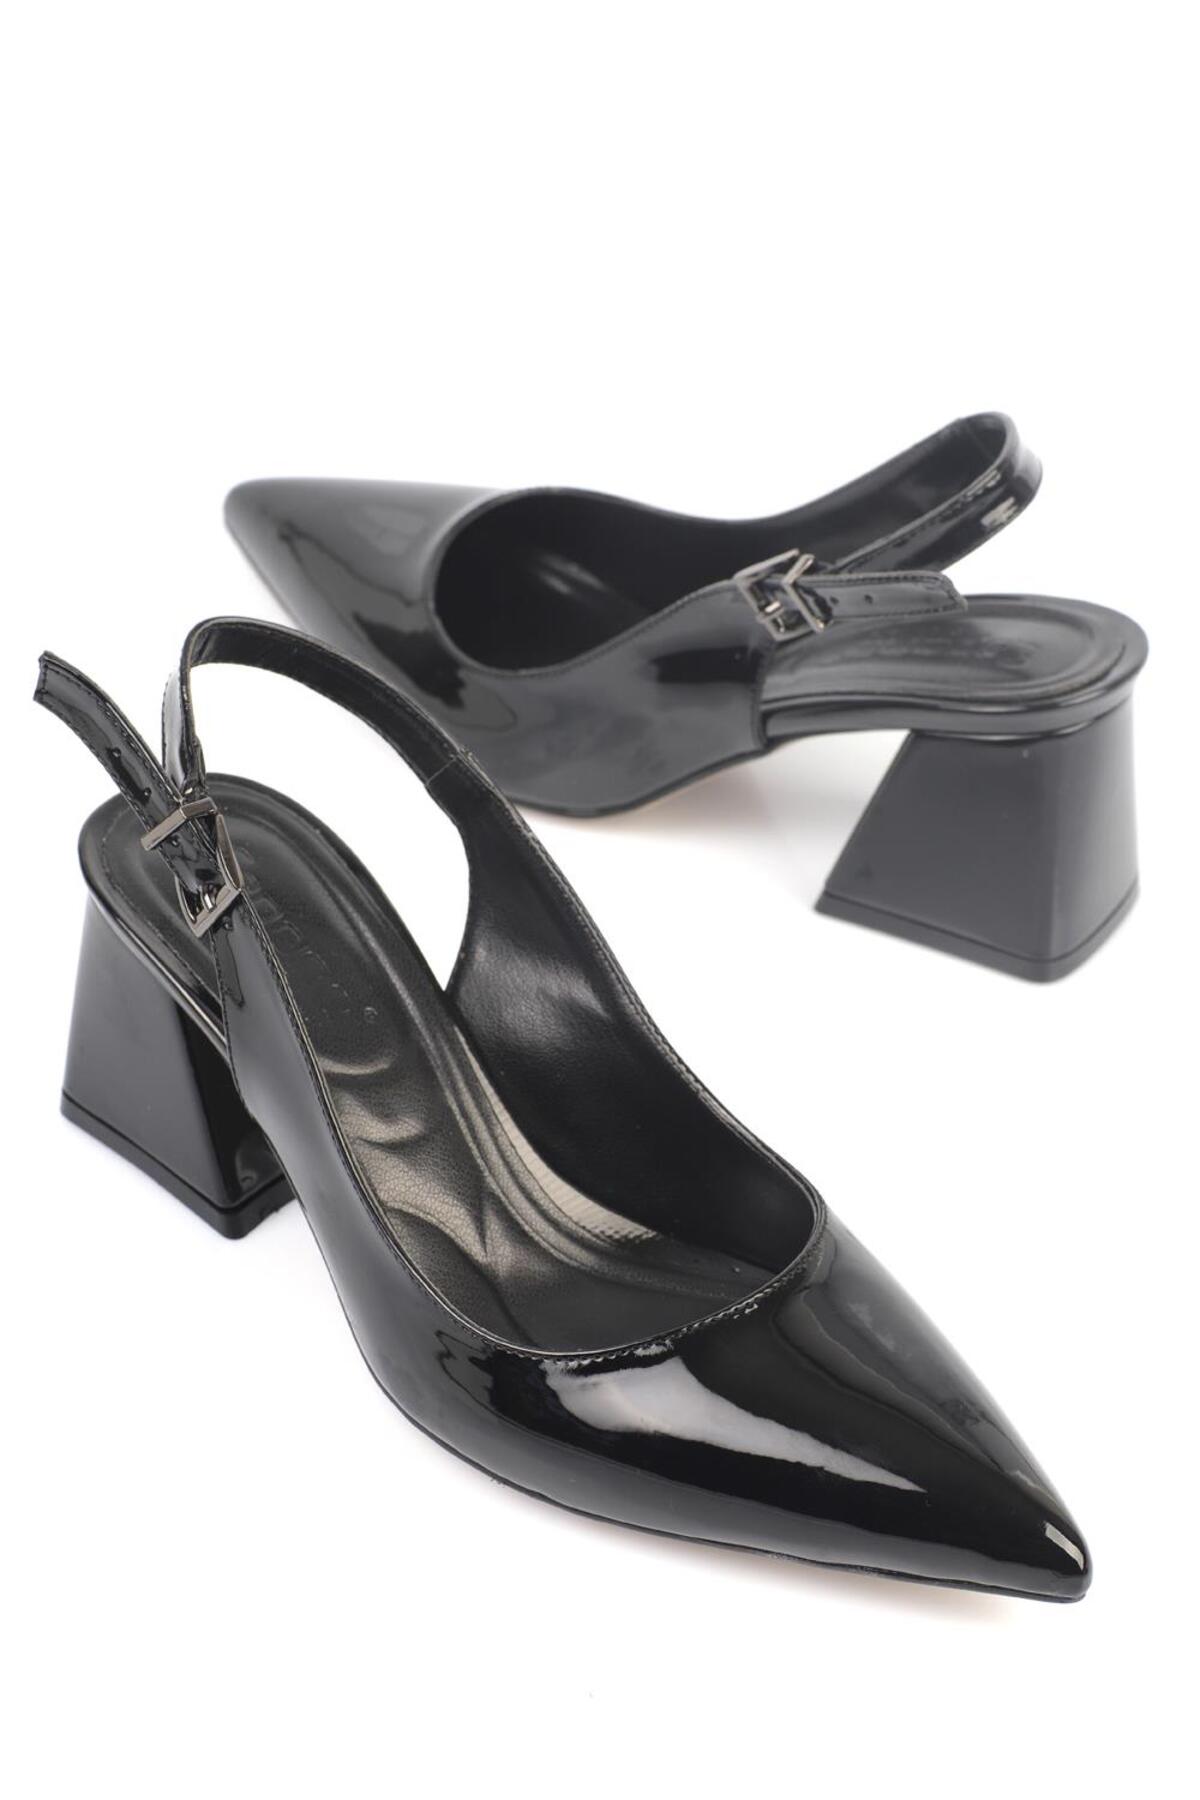 Capone Outfitters Women's Heeled Shoes